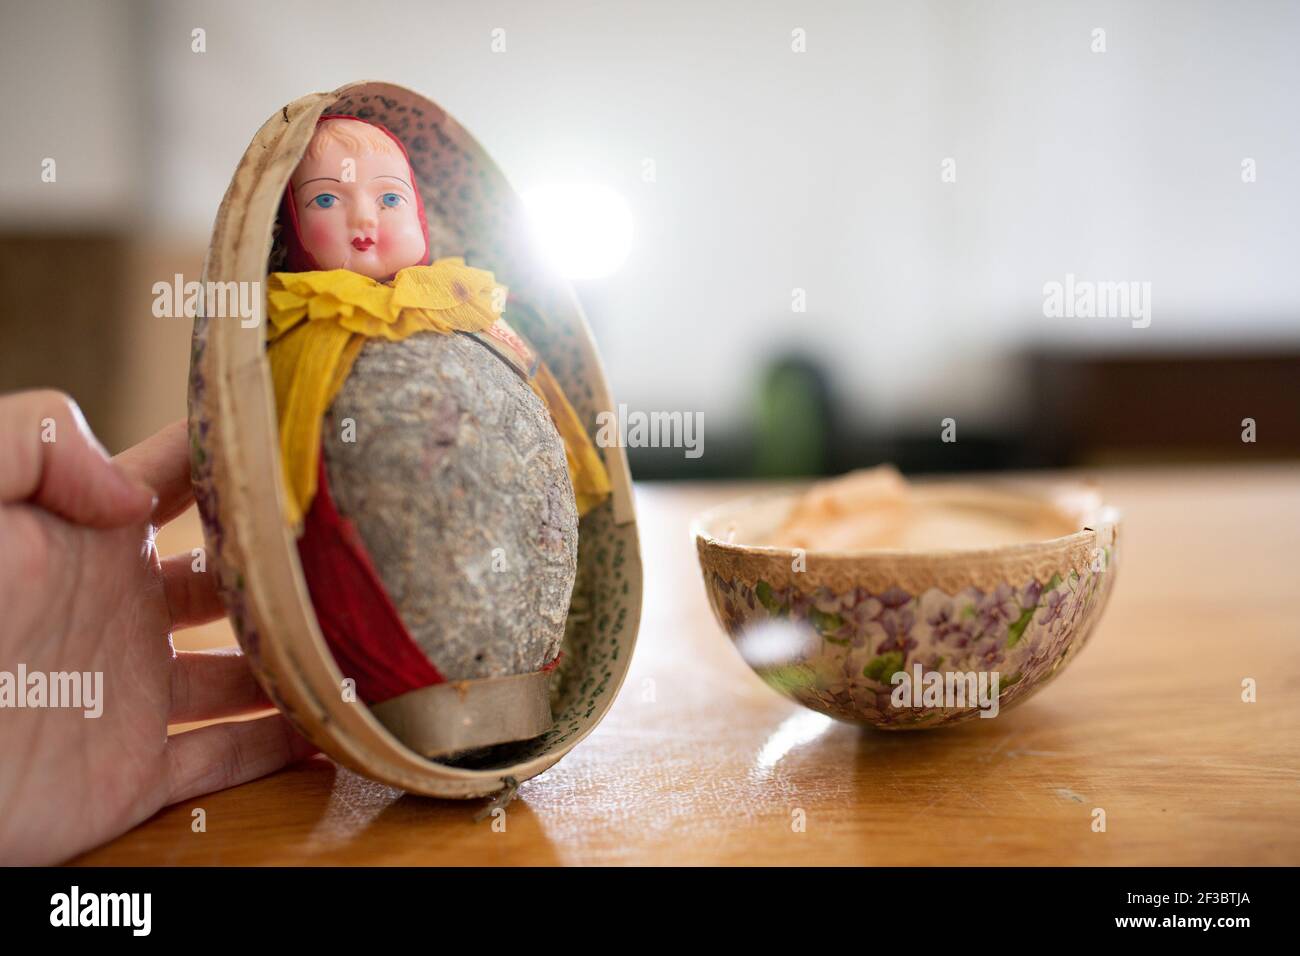 A rare 97-year-old Pascall's Easter egg which is set to go on display at a museum after it sold for ??800 when it went up for auction at Hansons' Etwall saleroom, near Derby, on March 12. The near-century-old chocolate gift, wrapped up as a doll inside an egg-shaped decorative casing, was bought by Torquay tourist attraction Bygones. Picture date: Tuesday March 16, 2021. Stock Photo